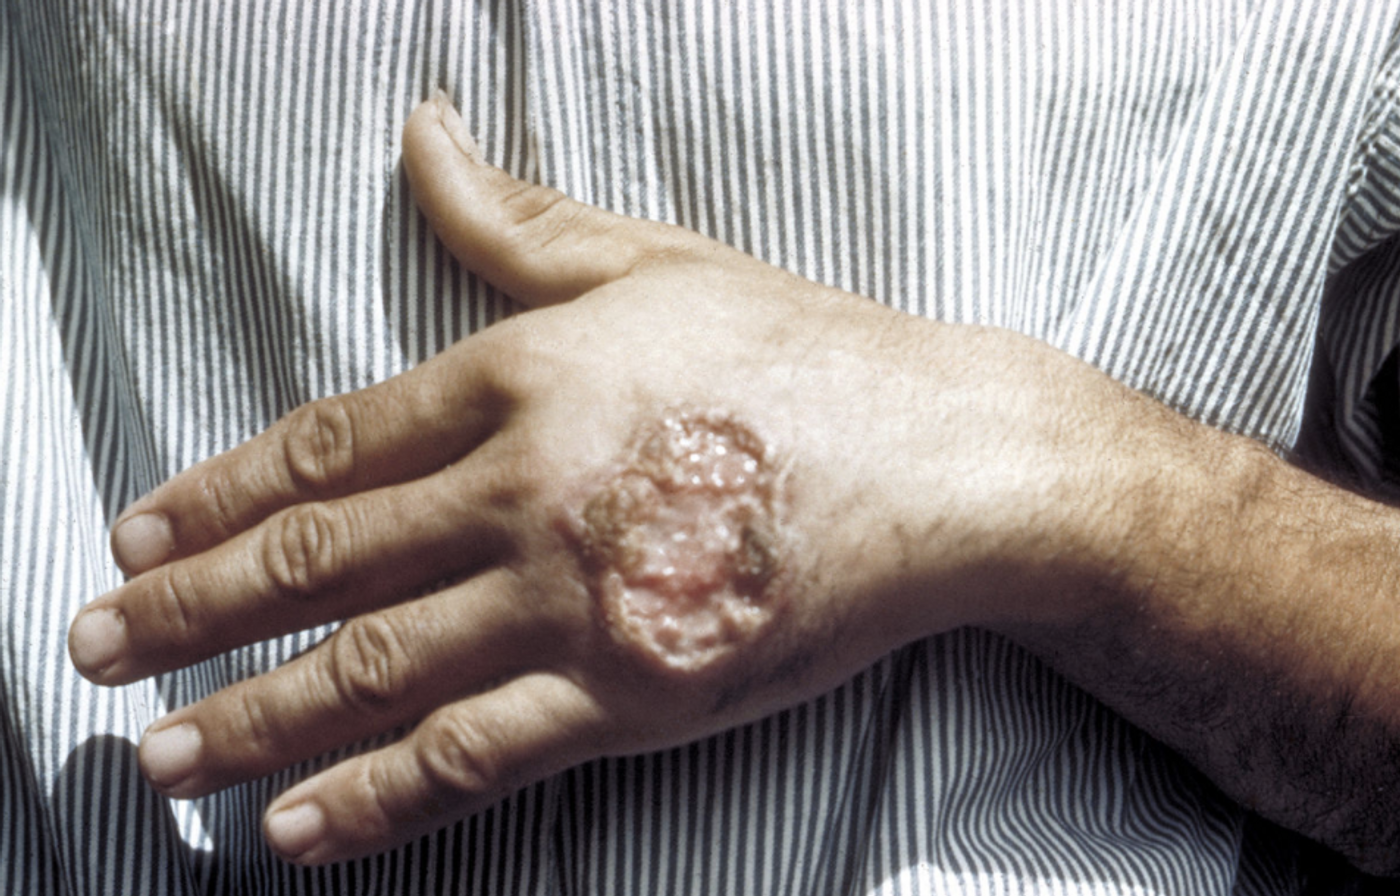 Skin ulcer due to leishmaniasis, hand of Central American adult. / Credit: CDC/Dr. D.S. Martin